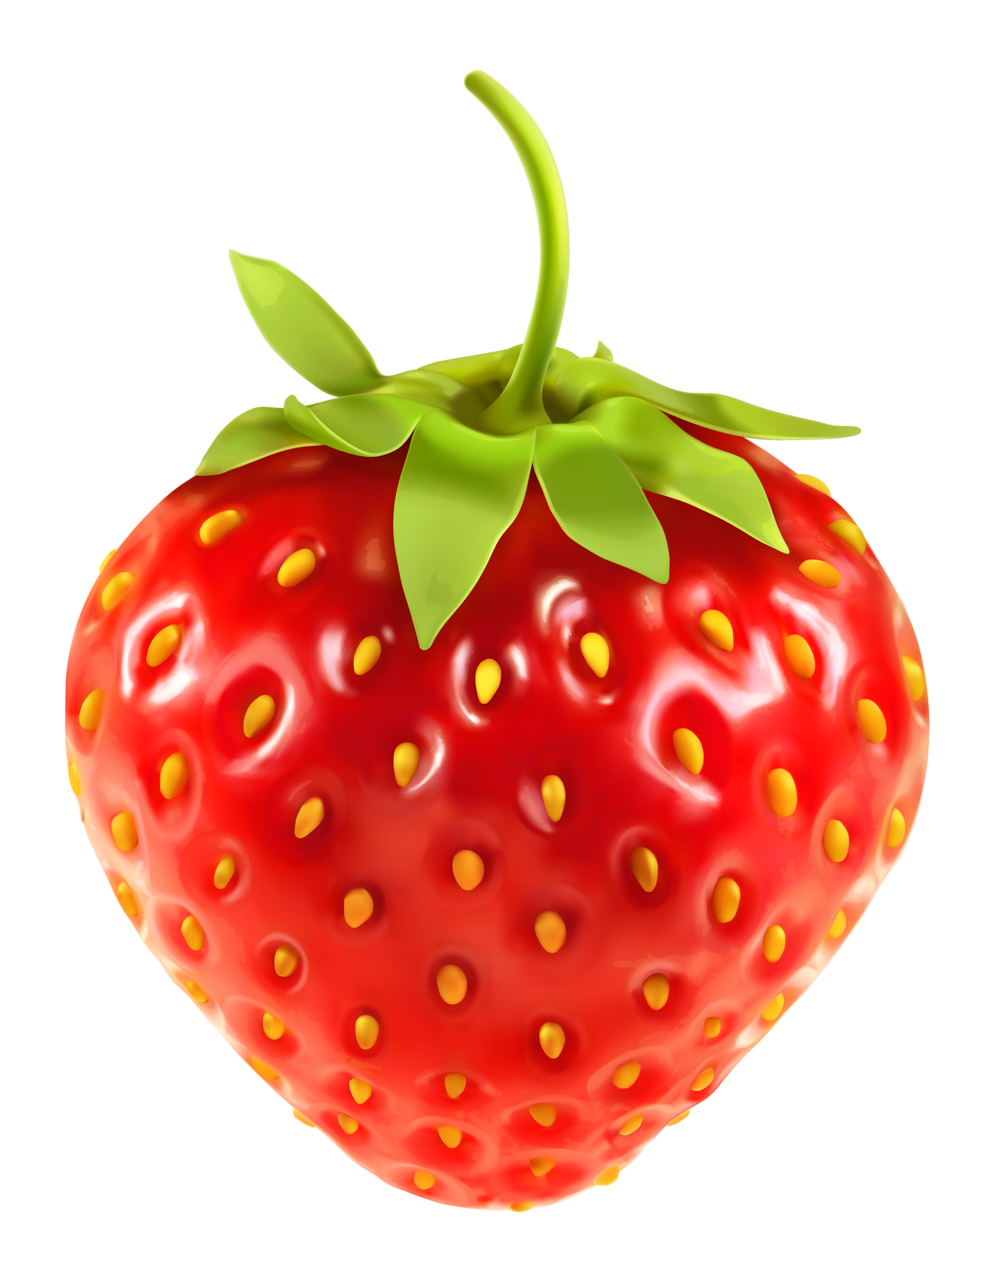 Lime clipart strawberry. Fruits set of vector